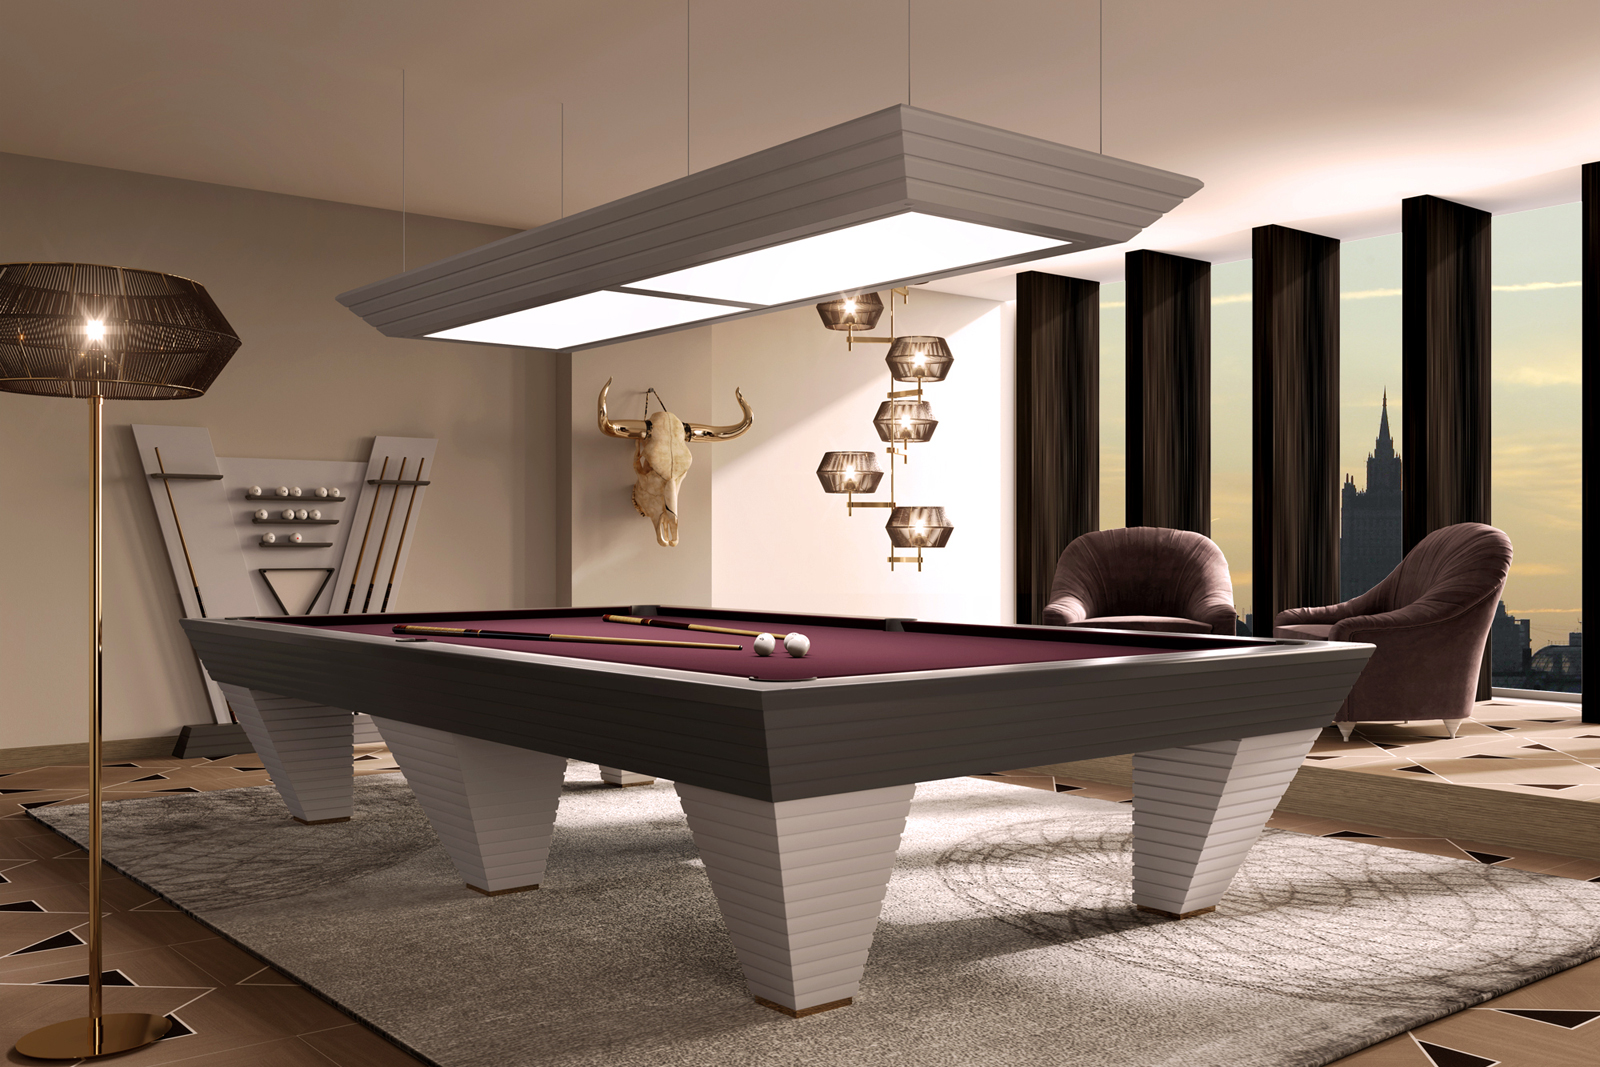 Luxury Pool Tables for sale for billiard rooms made in italy by Vismara Design